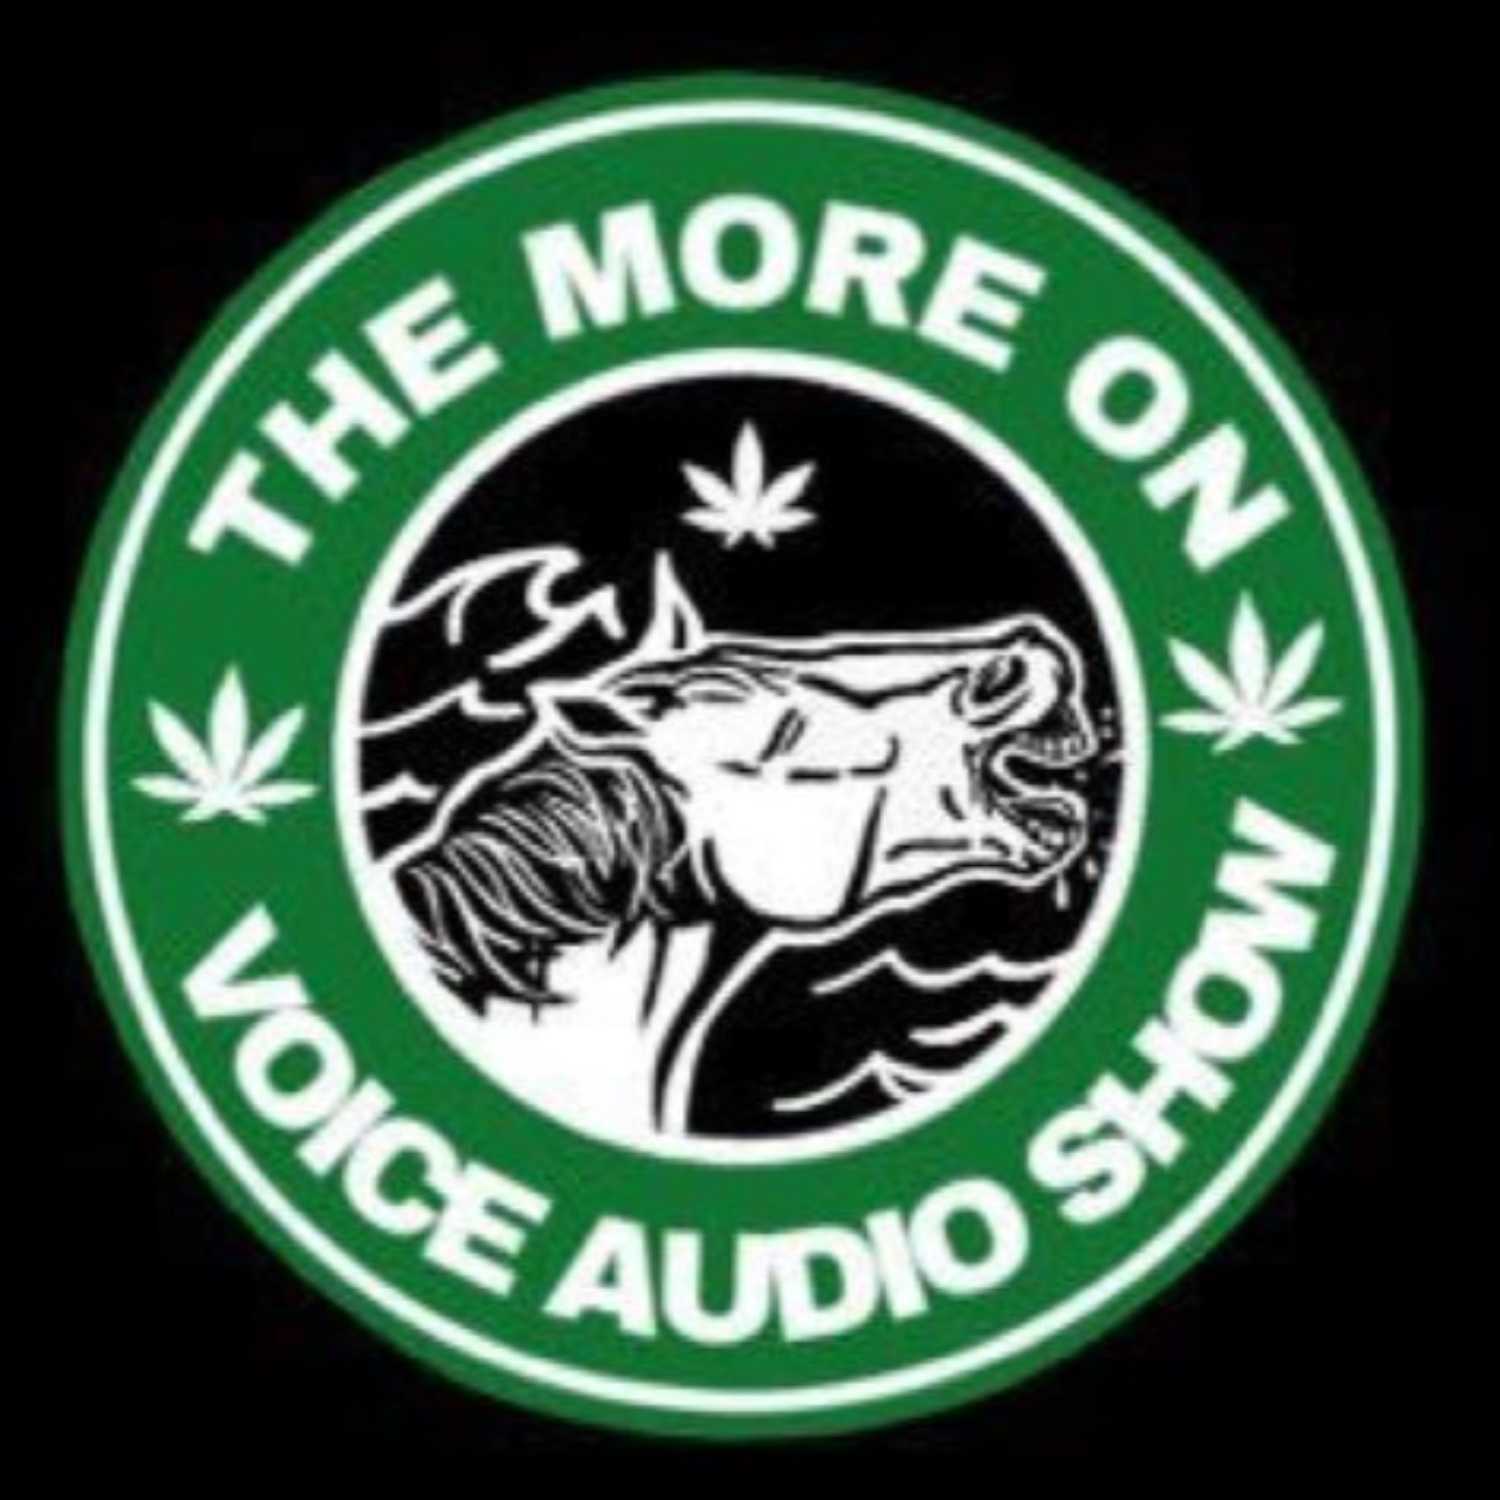 The More On Voice Audio Show: Episode 43 (One year anniversary special)